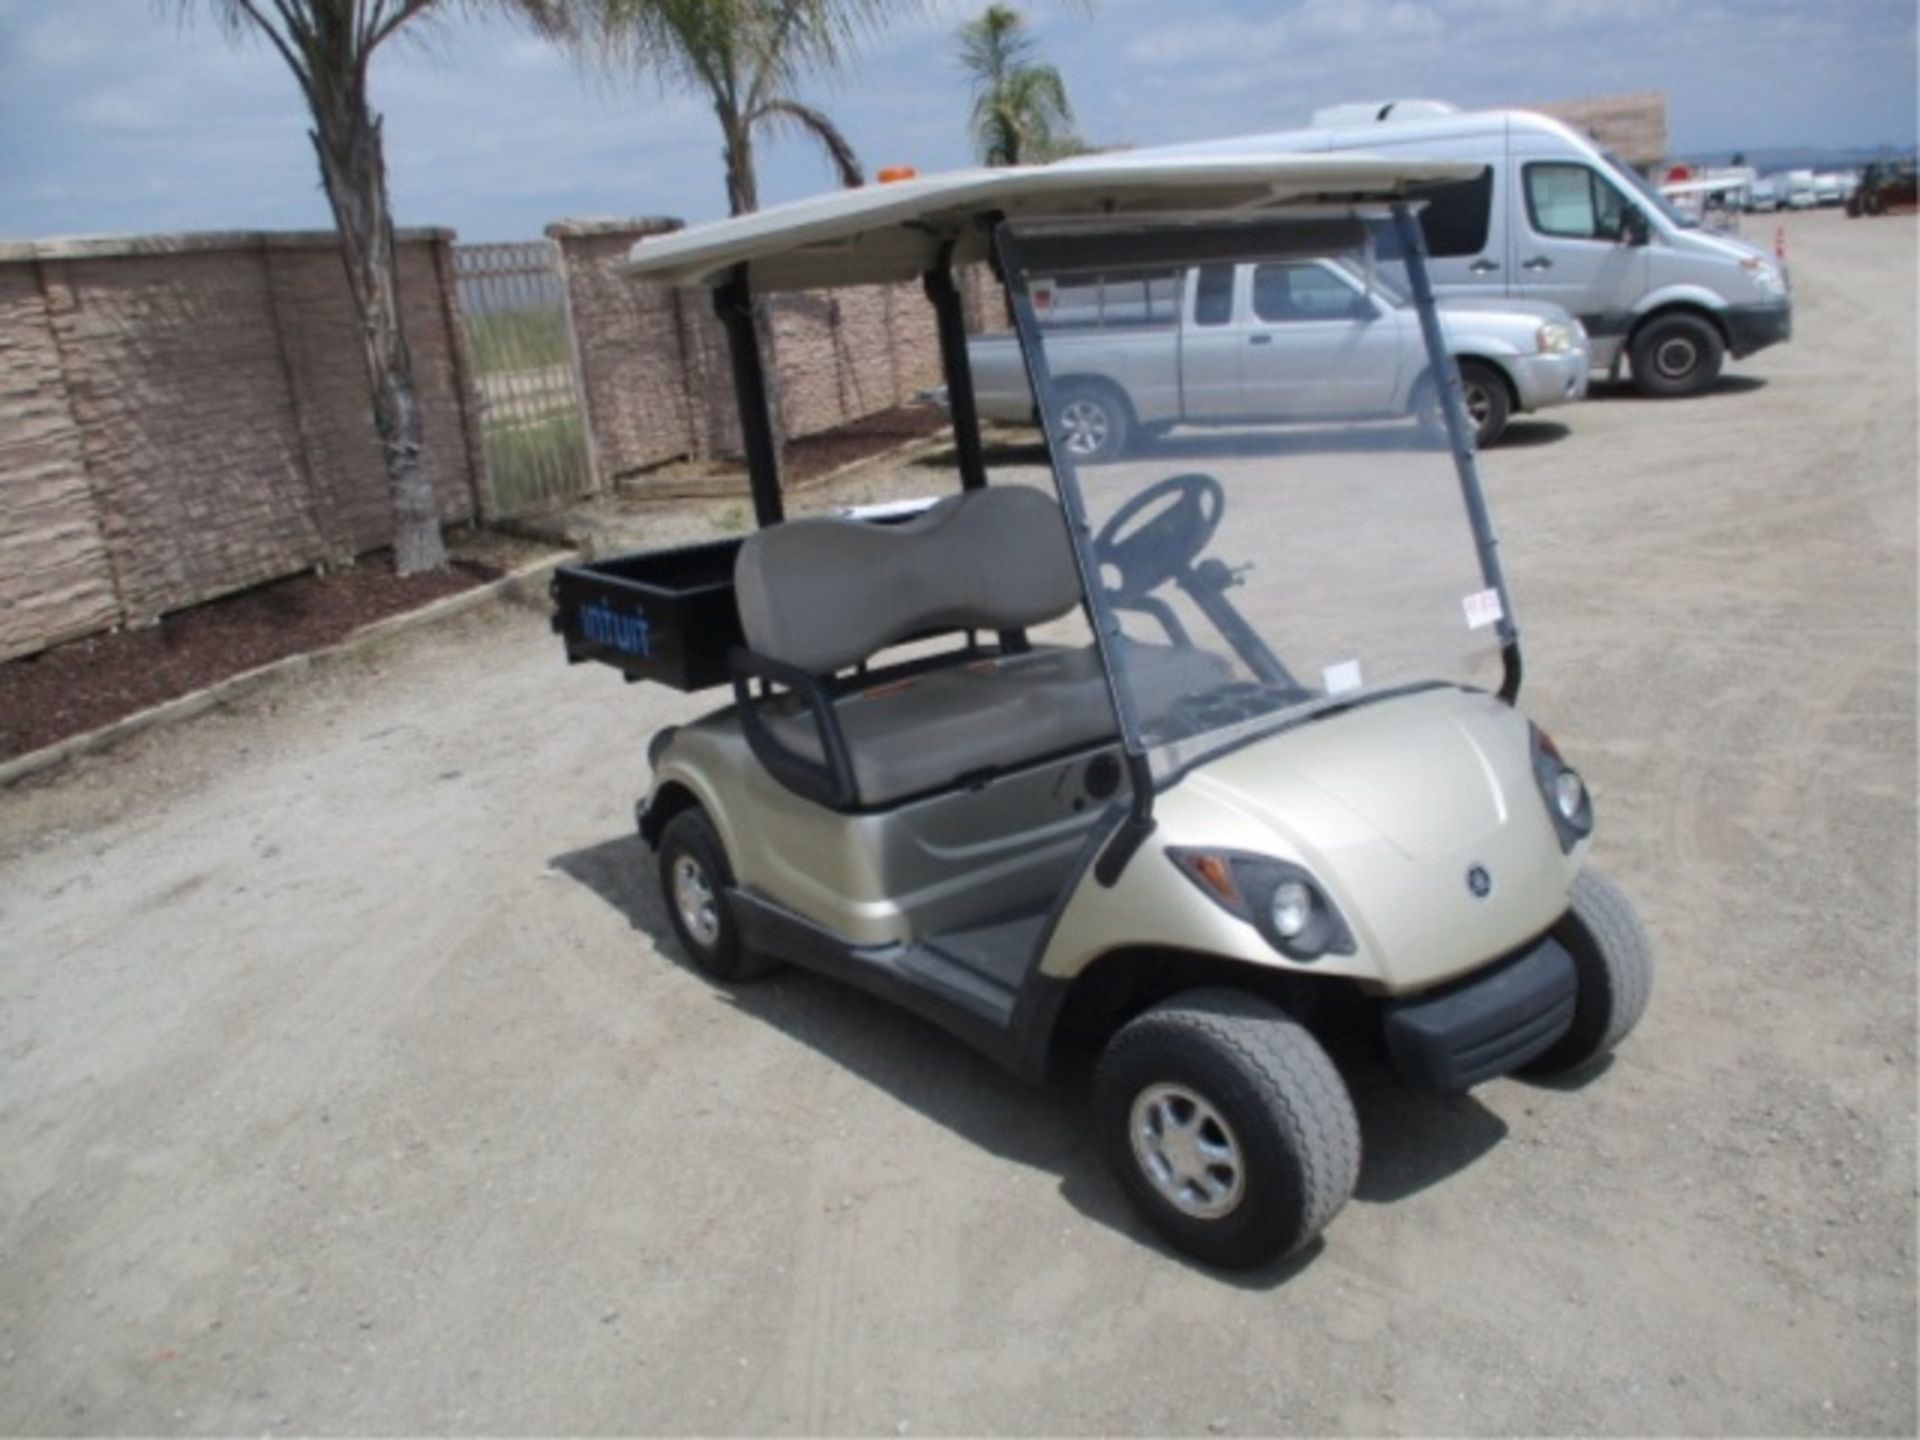 Yamaha Utility Golf Cart, Electric, Rear Metal Bed, Canopy, Includes Charger, S/N: JW1-F423610 - Image 5 of 24